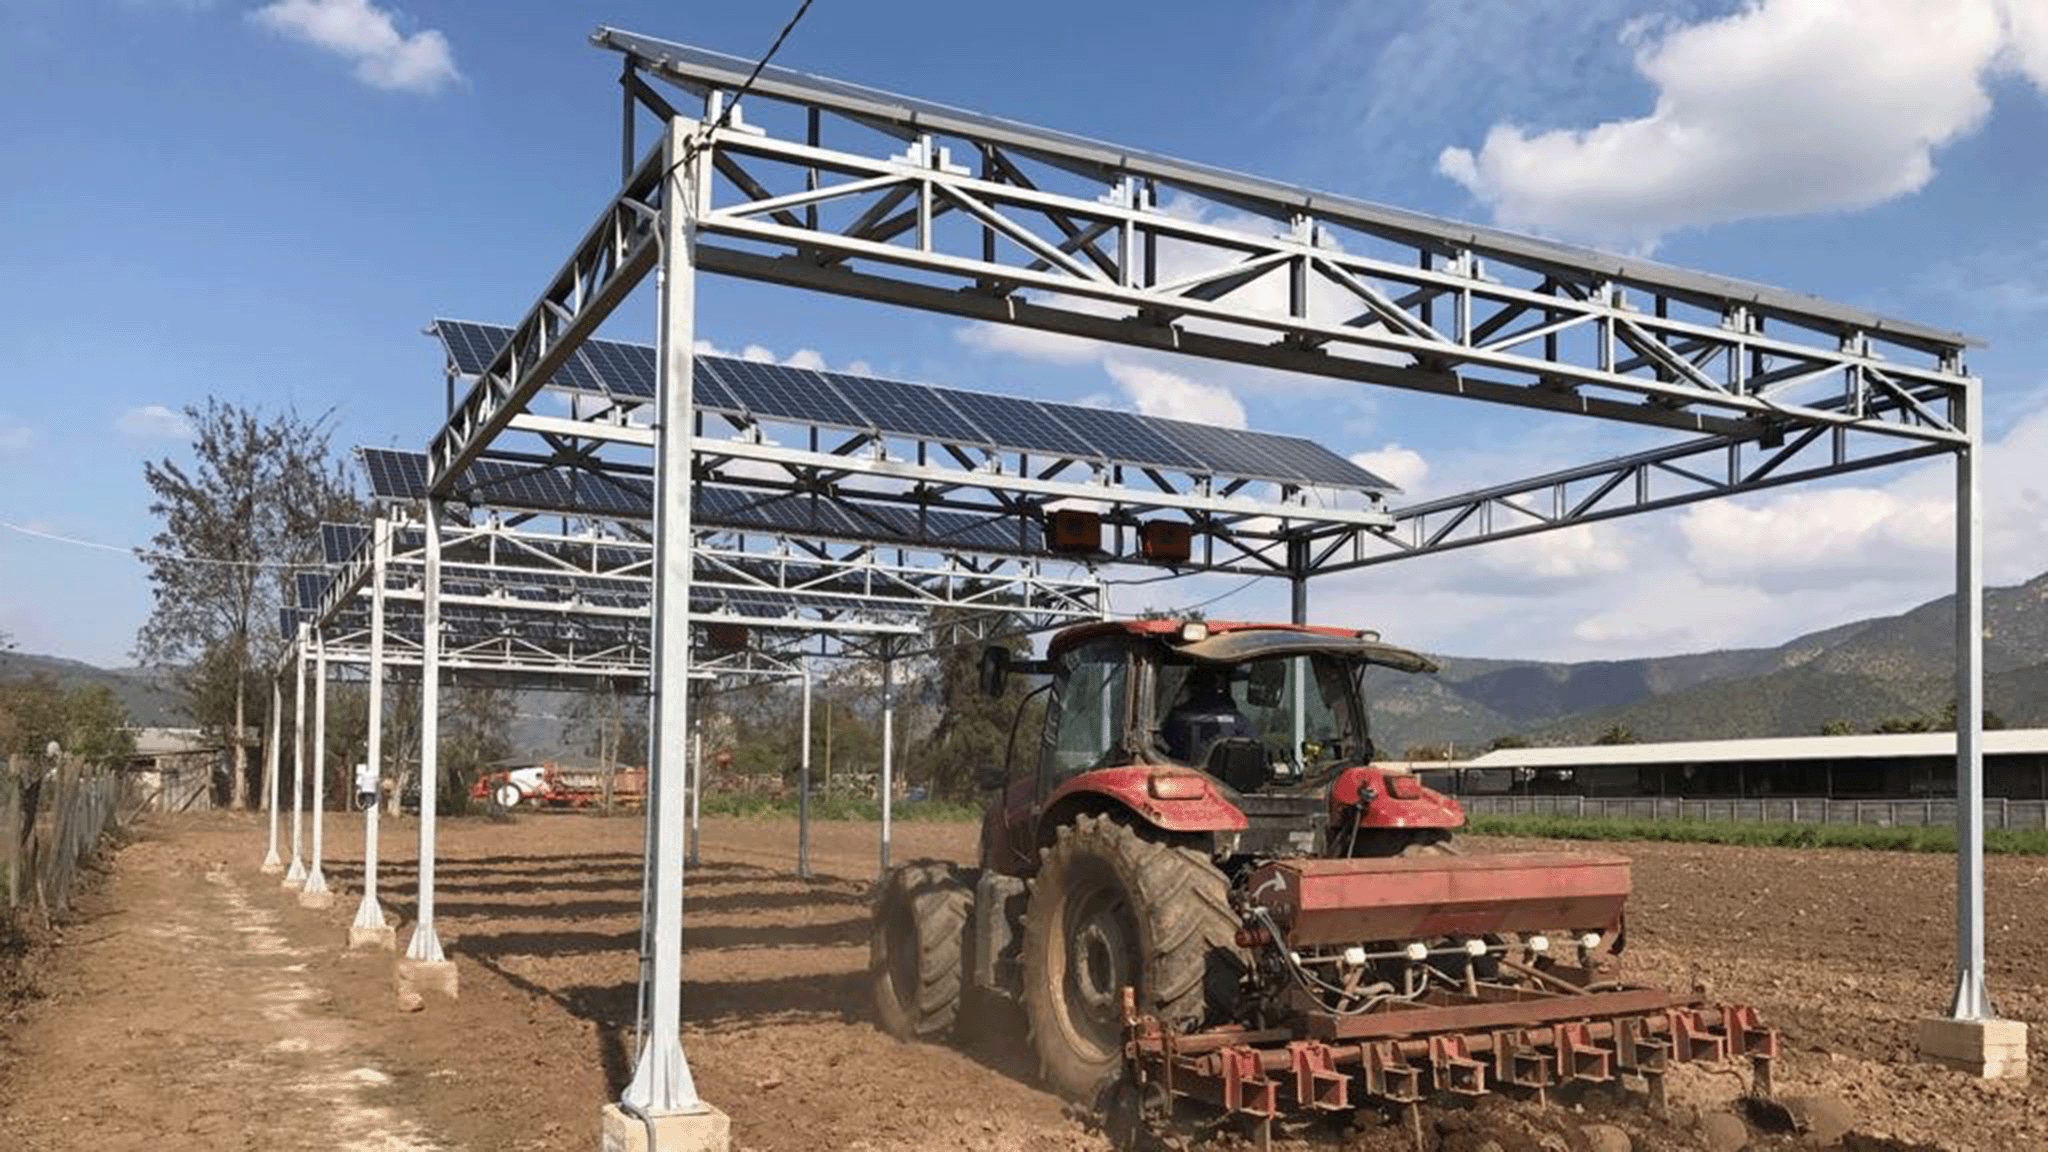 Farm tractor passing below elevated solar panels in an agricultural field in Chile